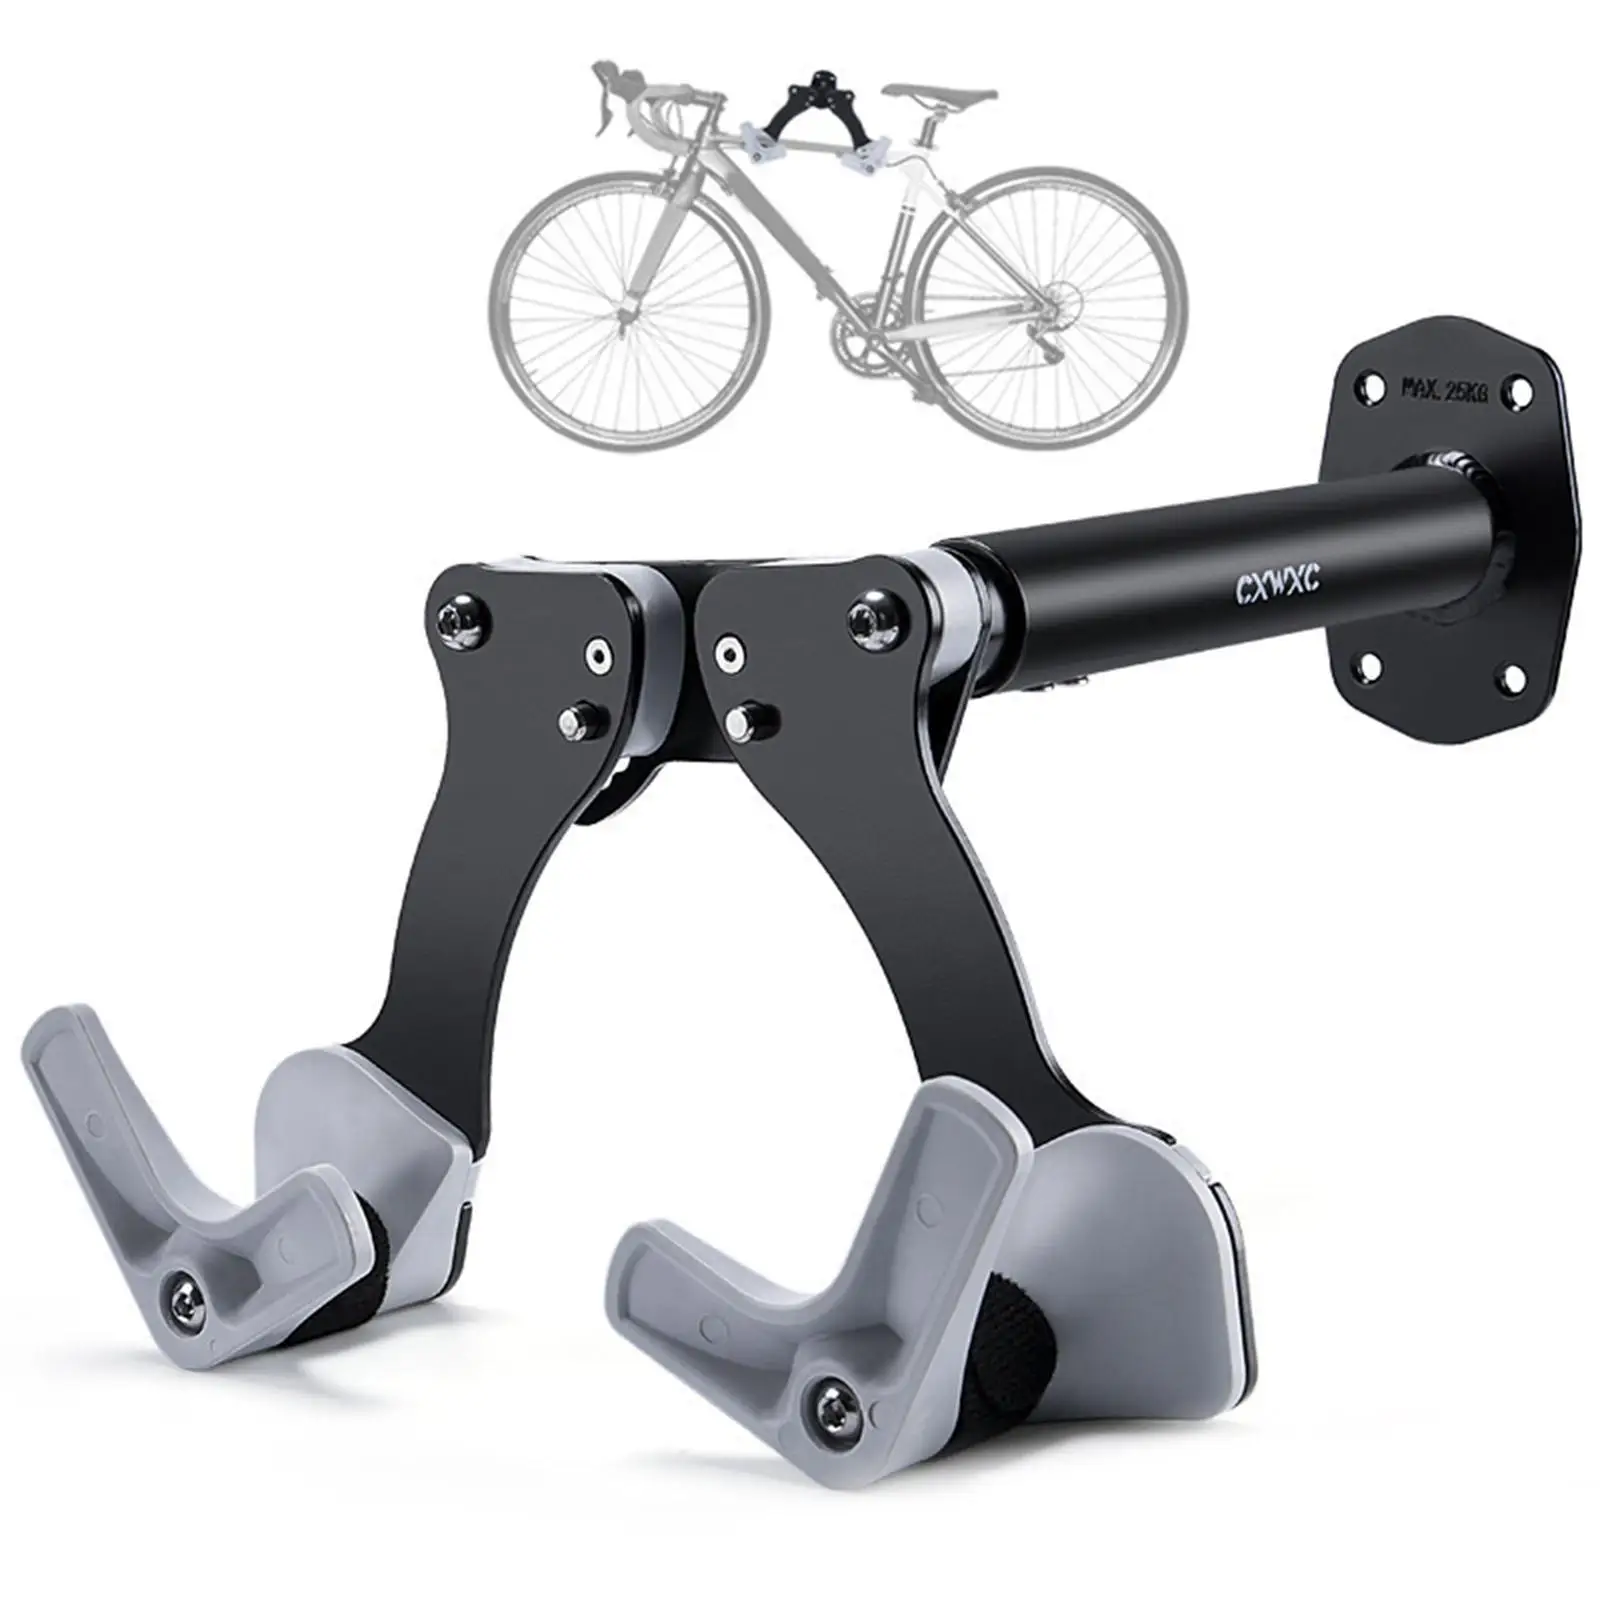 Folding Bicycle Rack Wall Hanger Adjustable Cycling Accessory Bicycle Hold Hooks Holder Cycle Wall Mount for Hybrid Bikes Home